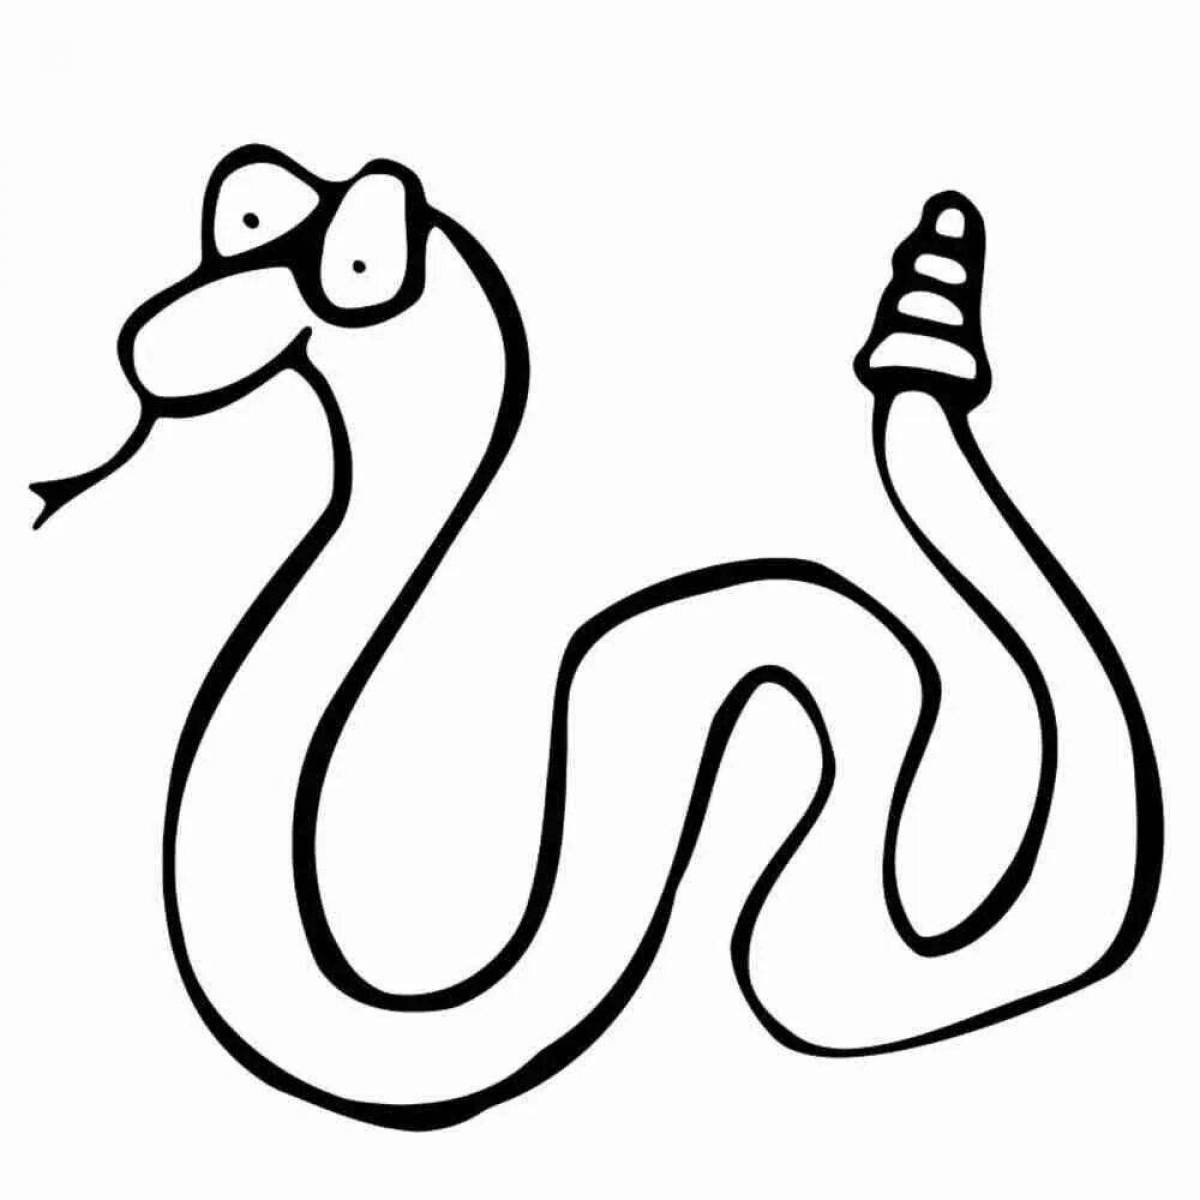 Intriguing snake drawing page